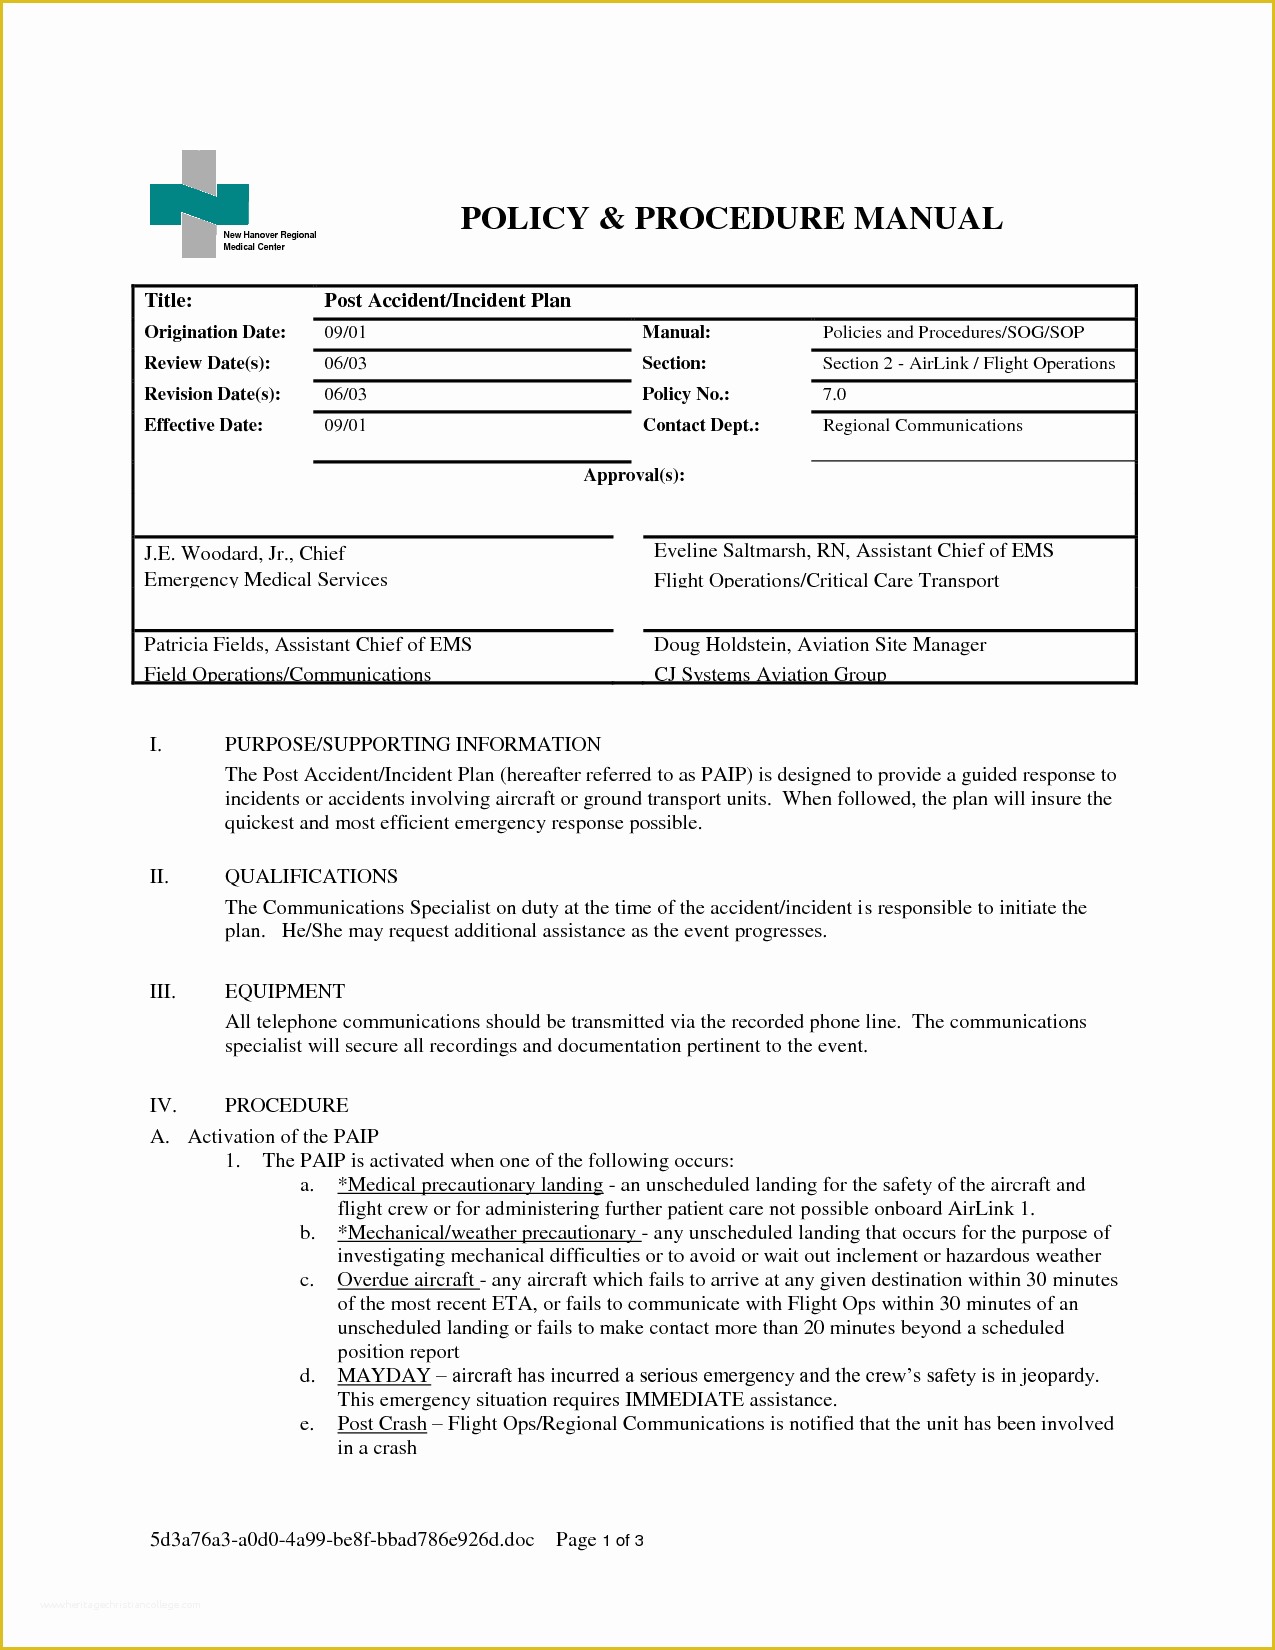 Procedure Manual Template Free Download Of 29 Of Policies and Procedures Manual Template